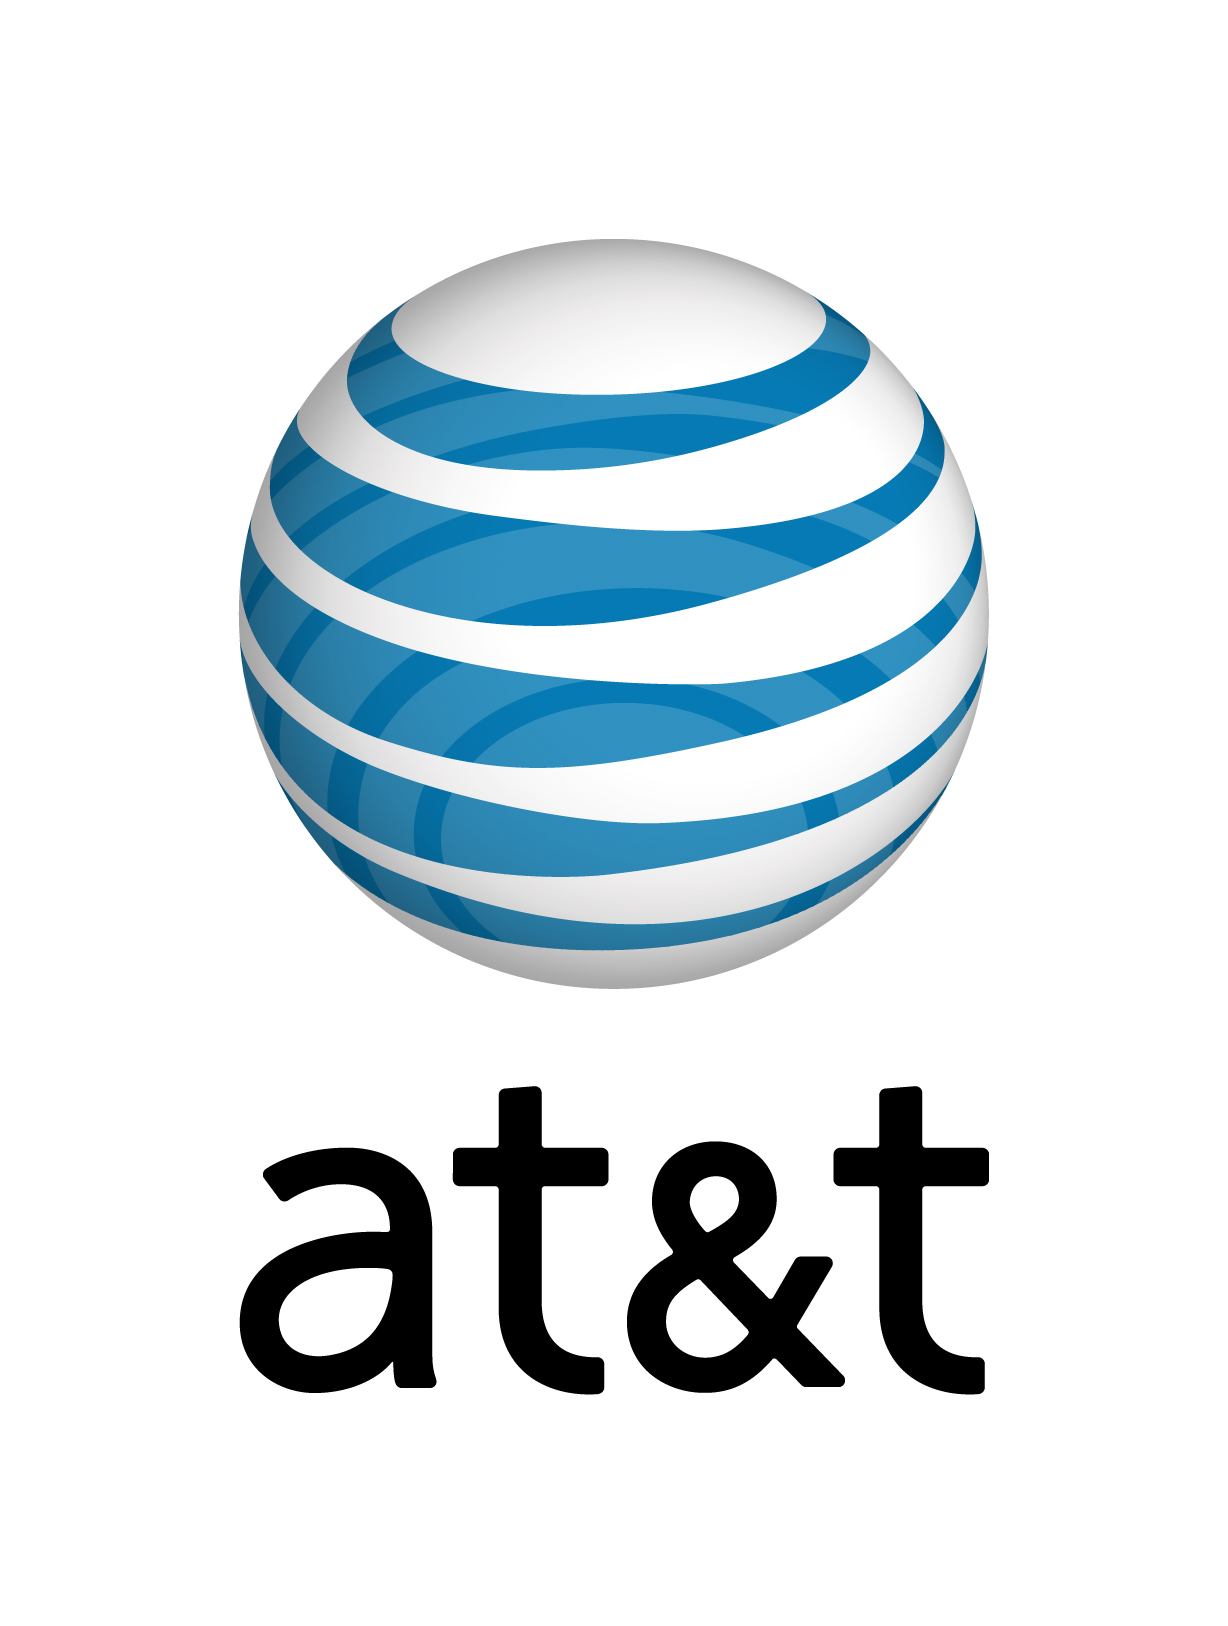 CONTACT AT&T CELL PHONE SERVICE